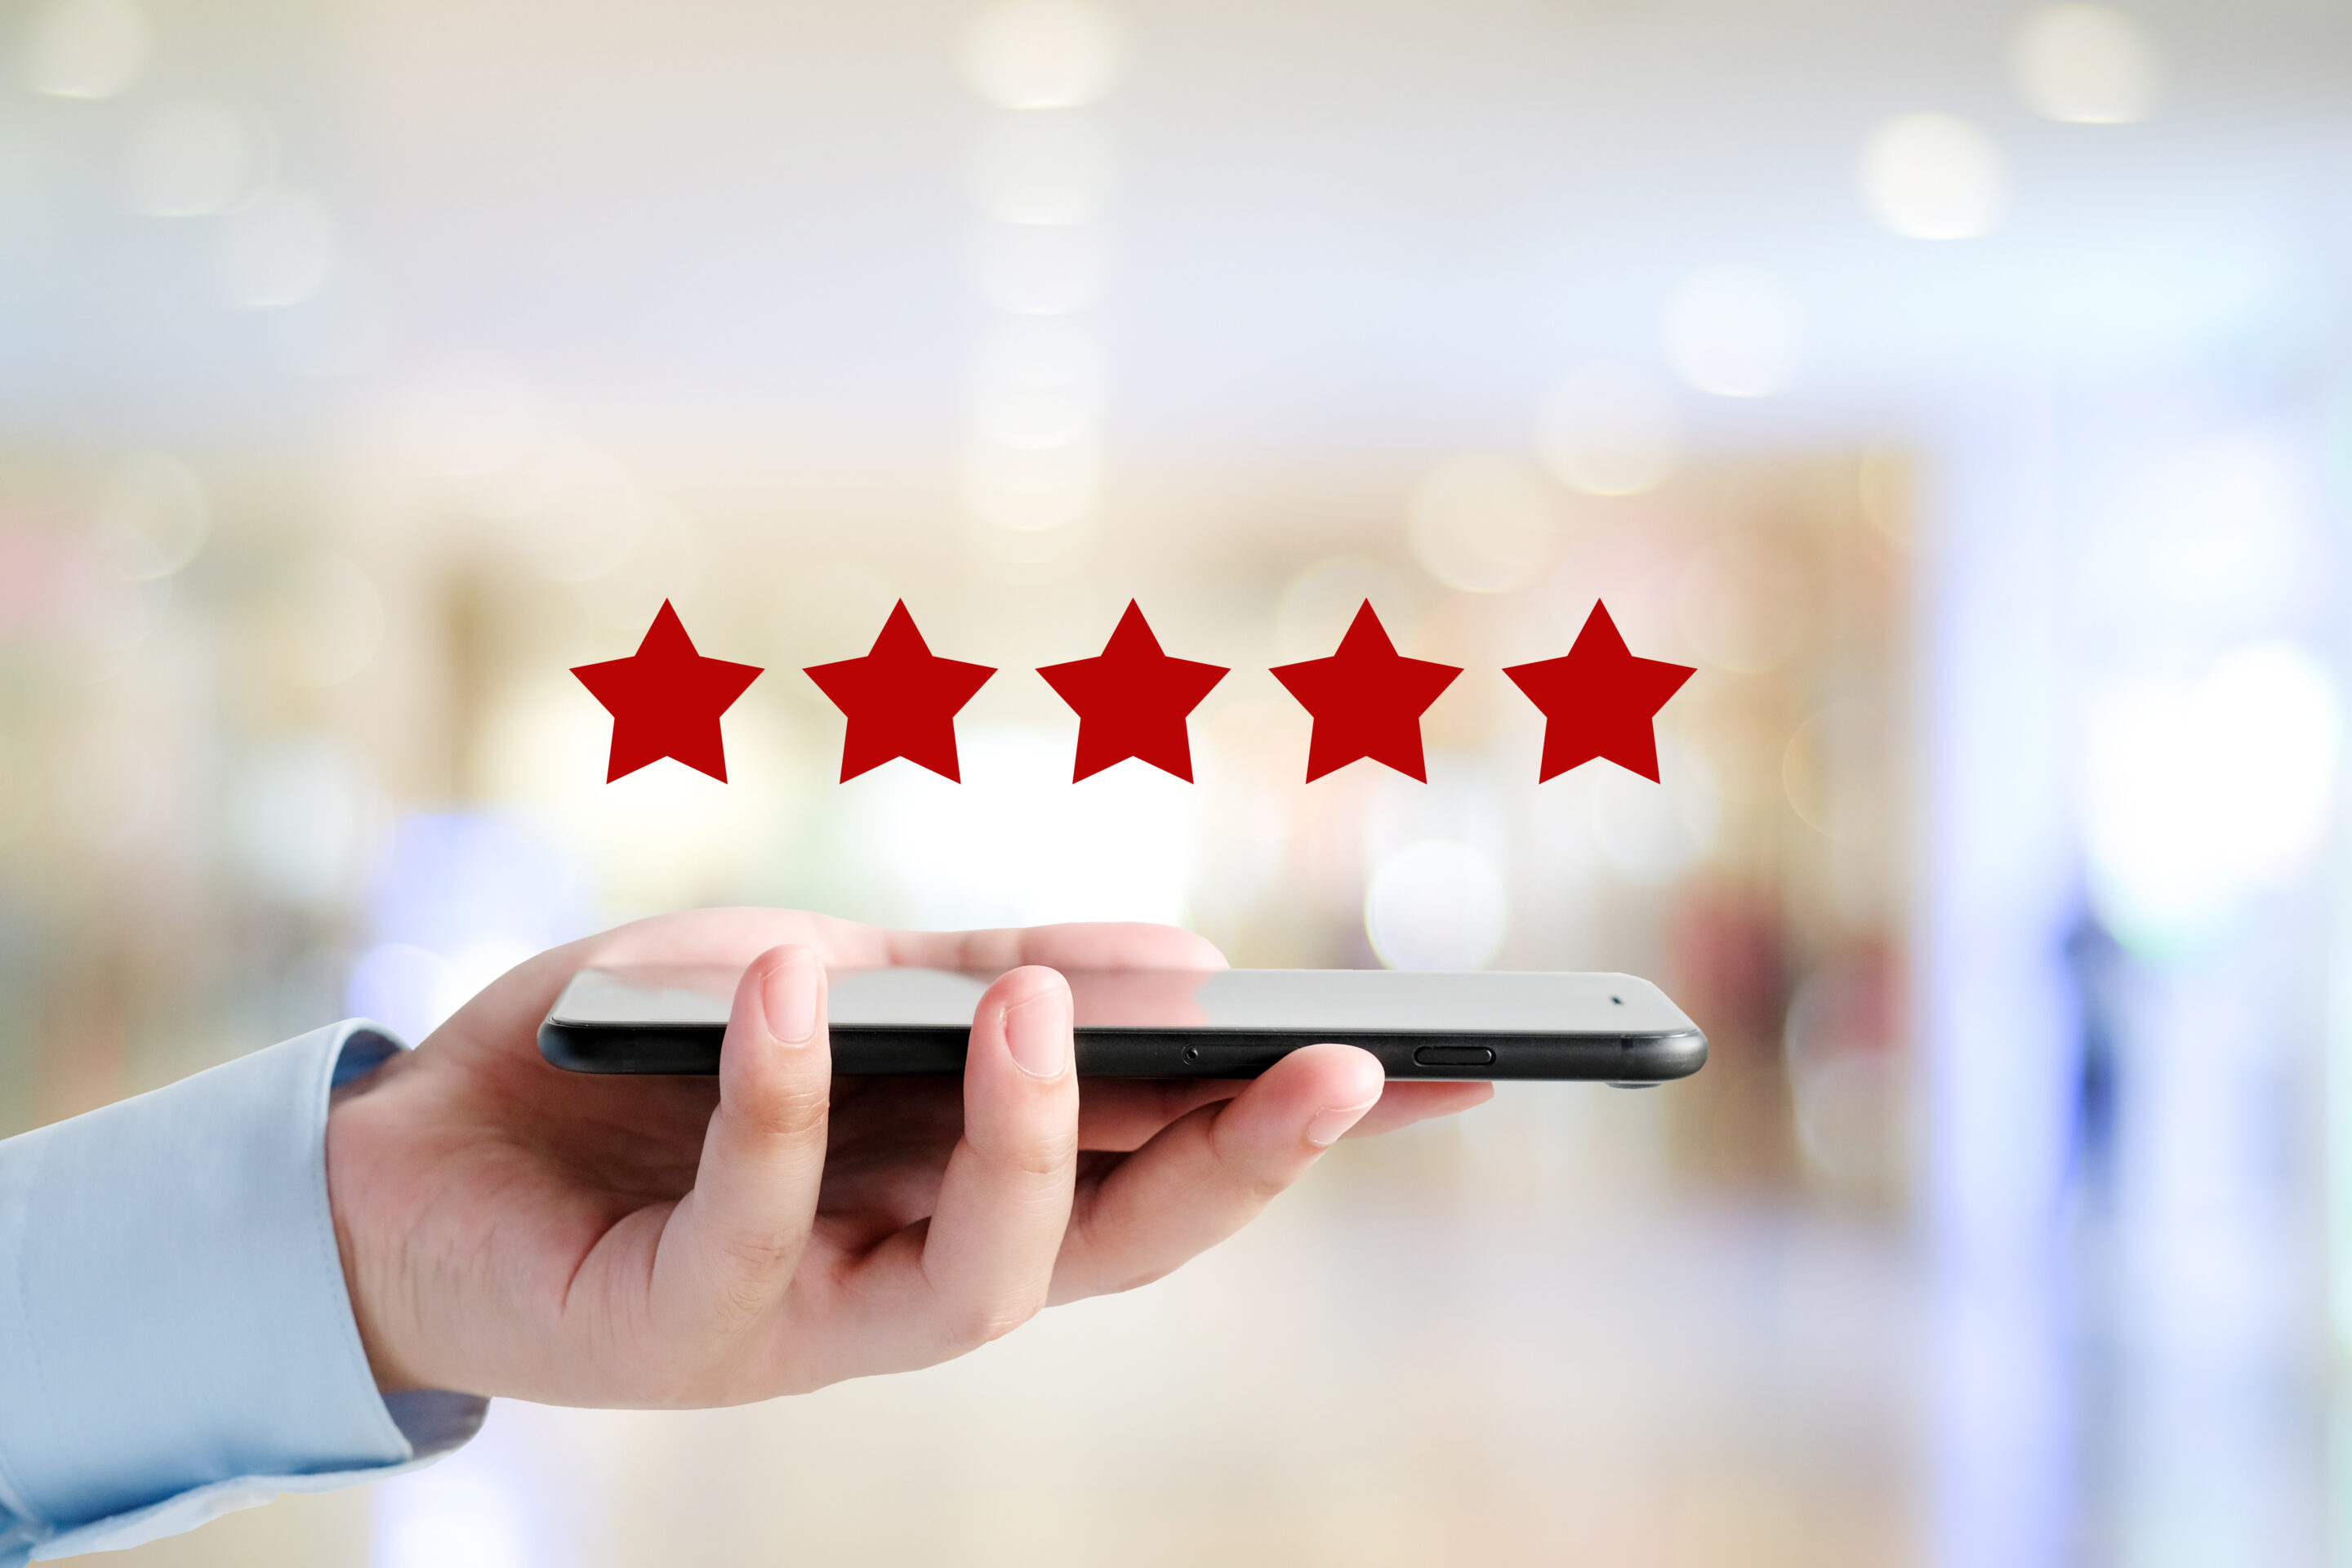 Buy online reviews: 5 reasons why you should not